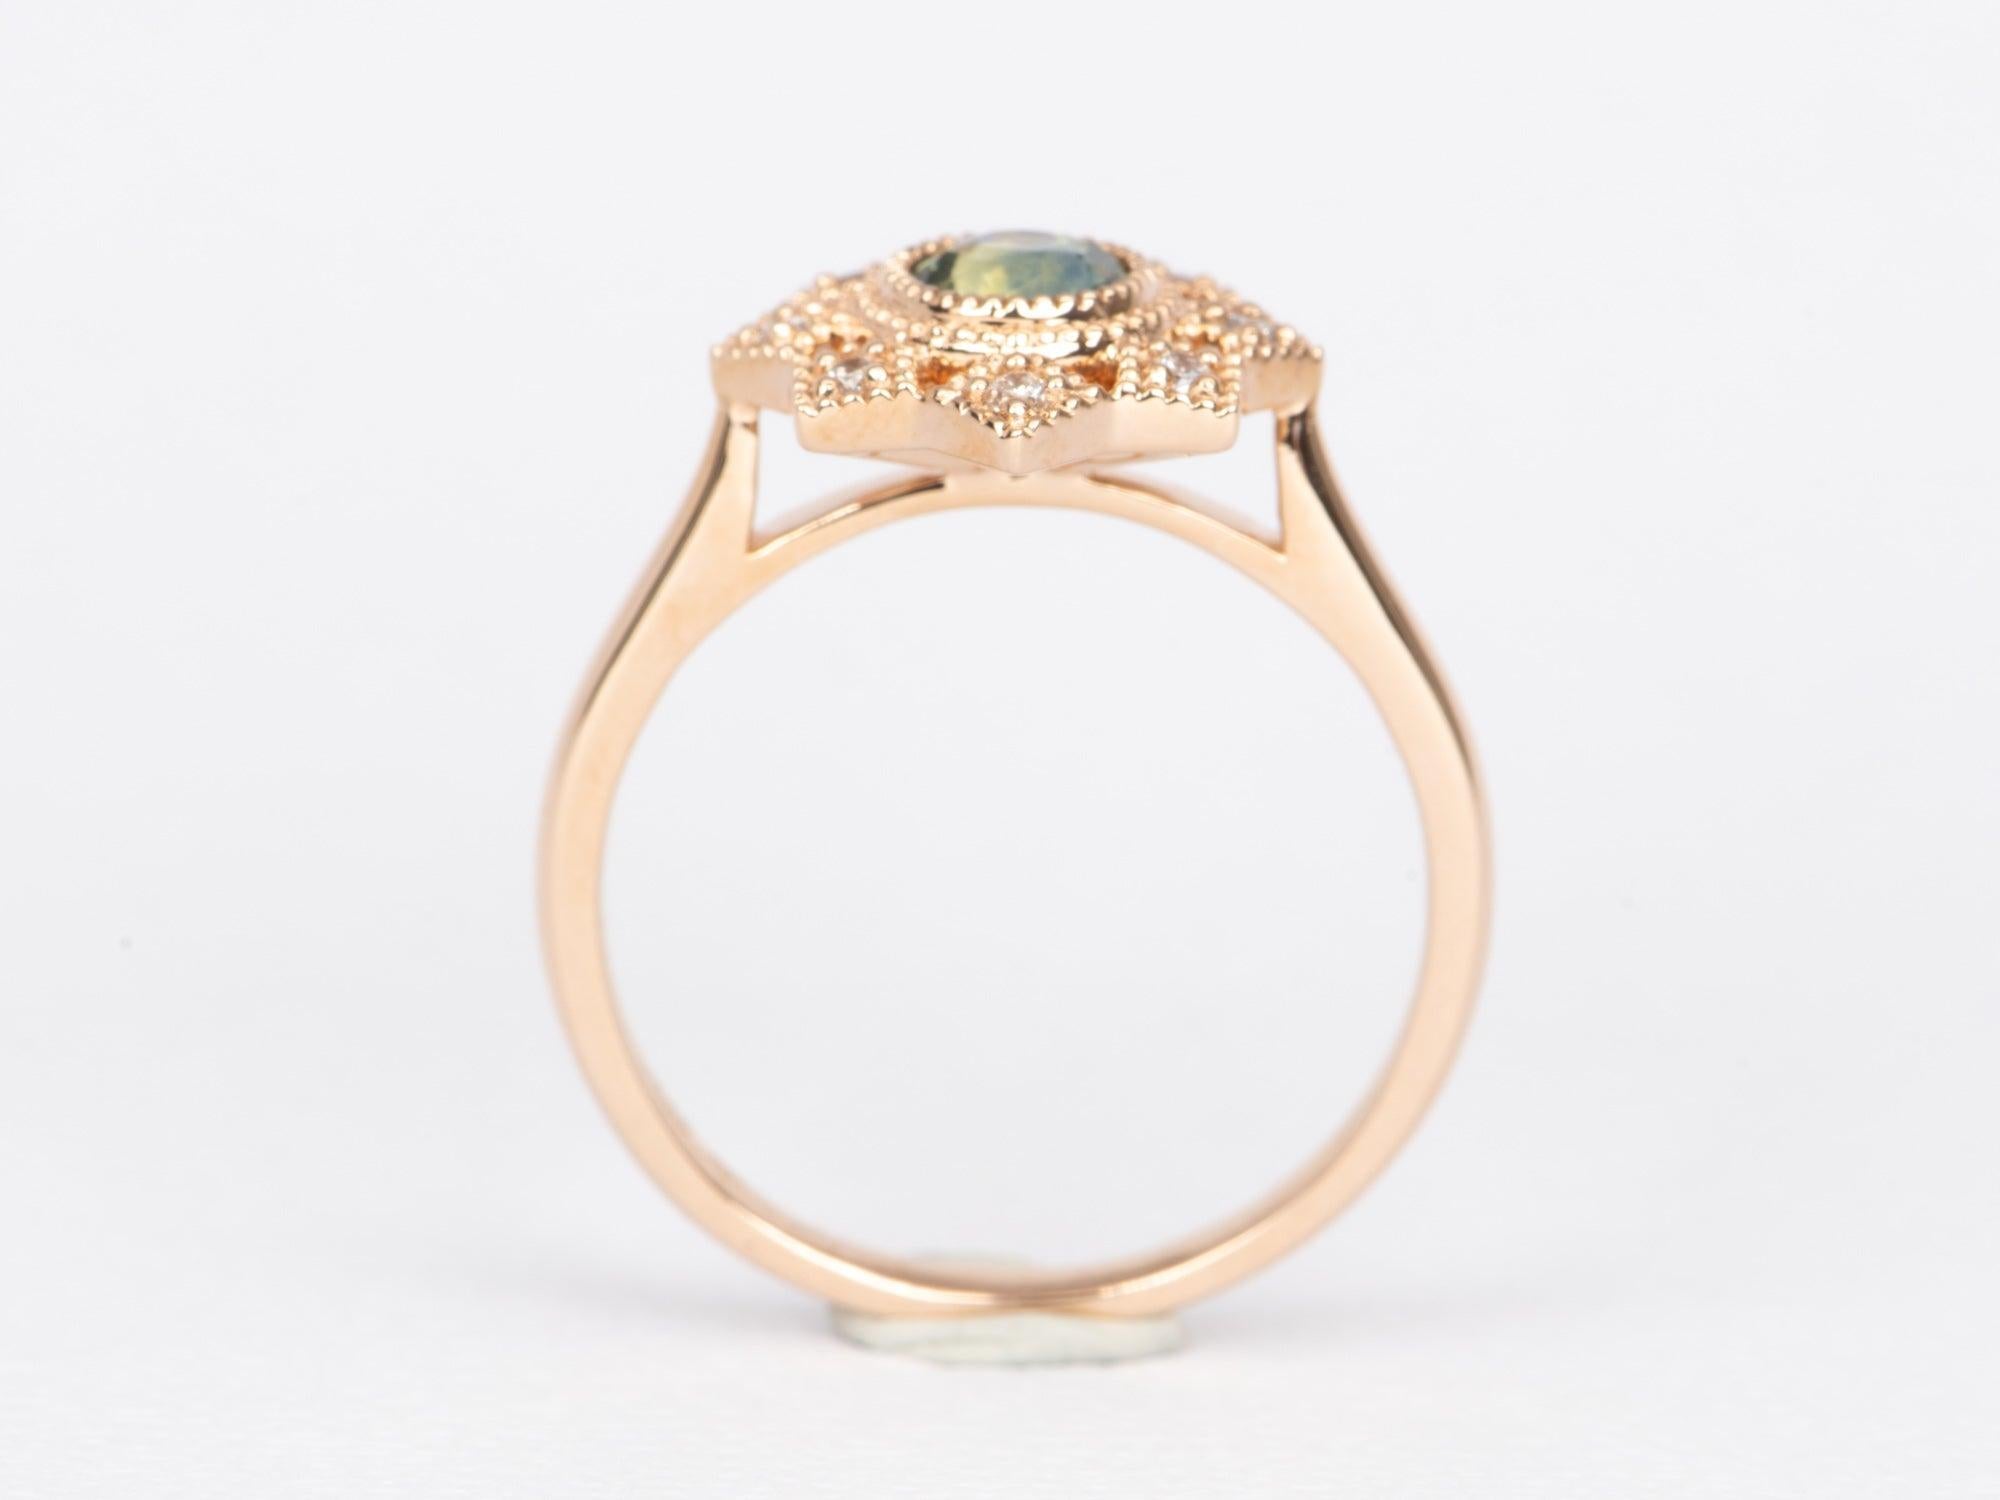 design your own teal montana sapphire ring